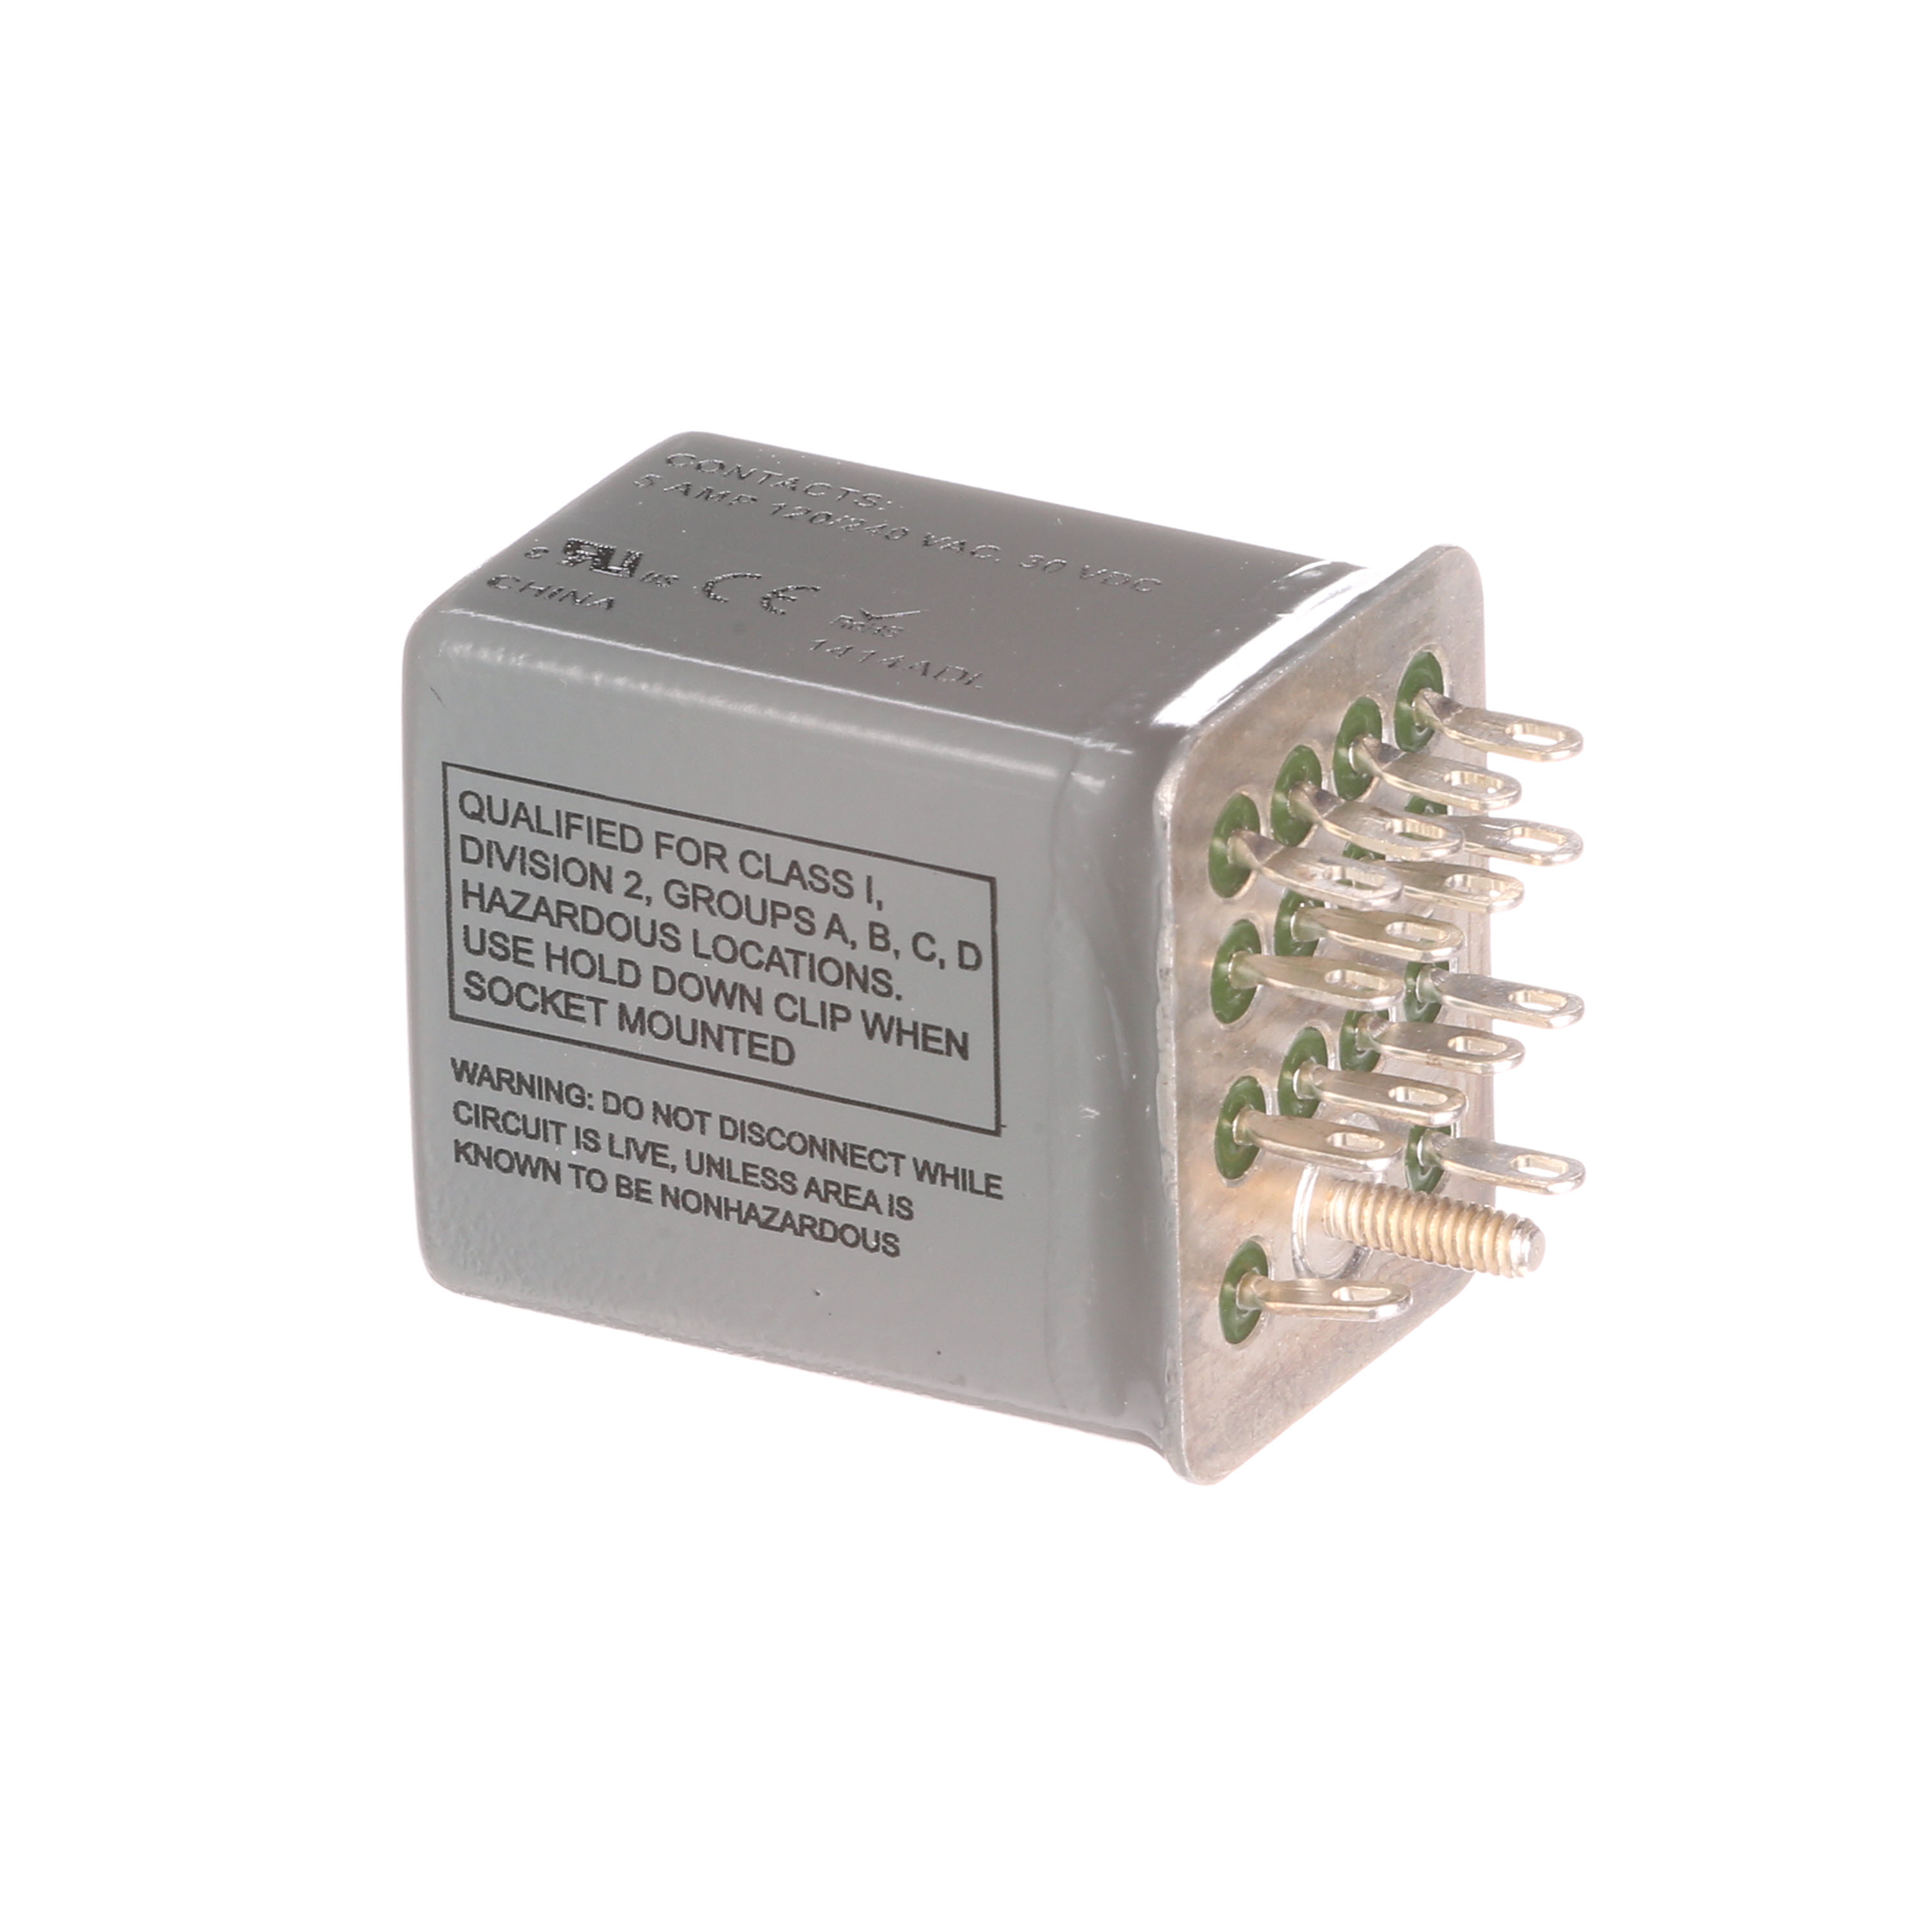 Plug-in Relay, Sealed 14-pin, Square Base 4PDT, 5A, 120VAC Hermetically Sealed Class I Div II Approved Uses Socket 3TX7144-1E5 or 3TX7144-4E5